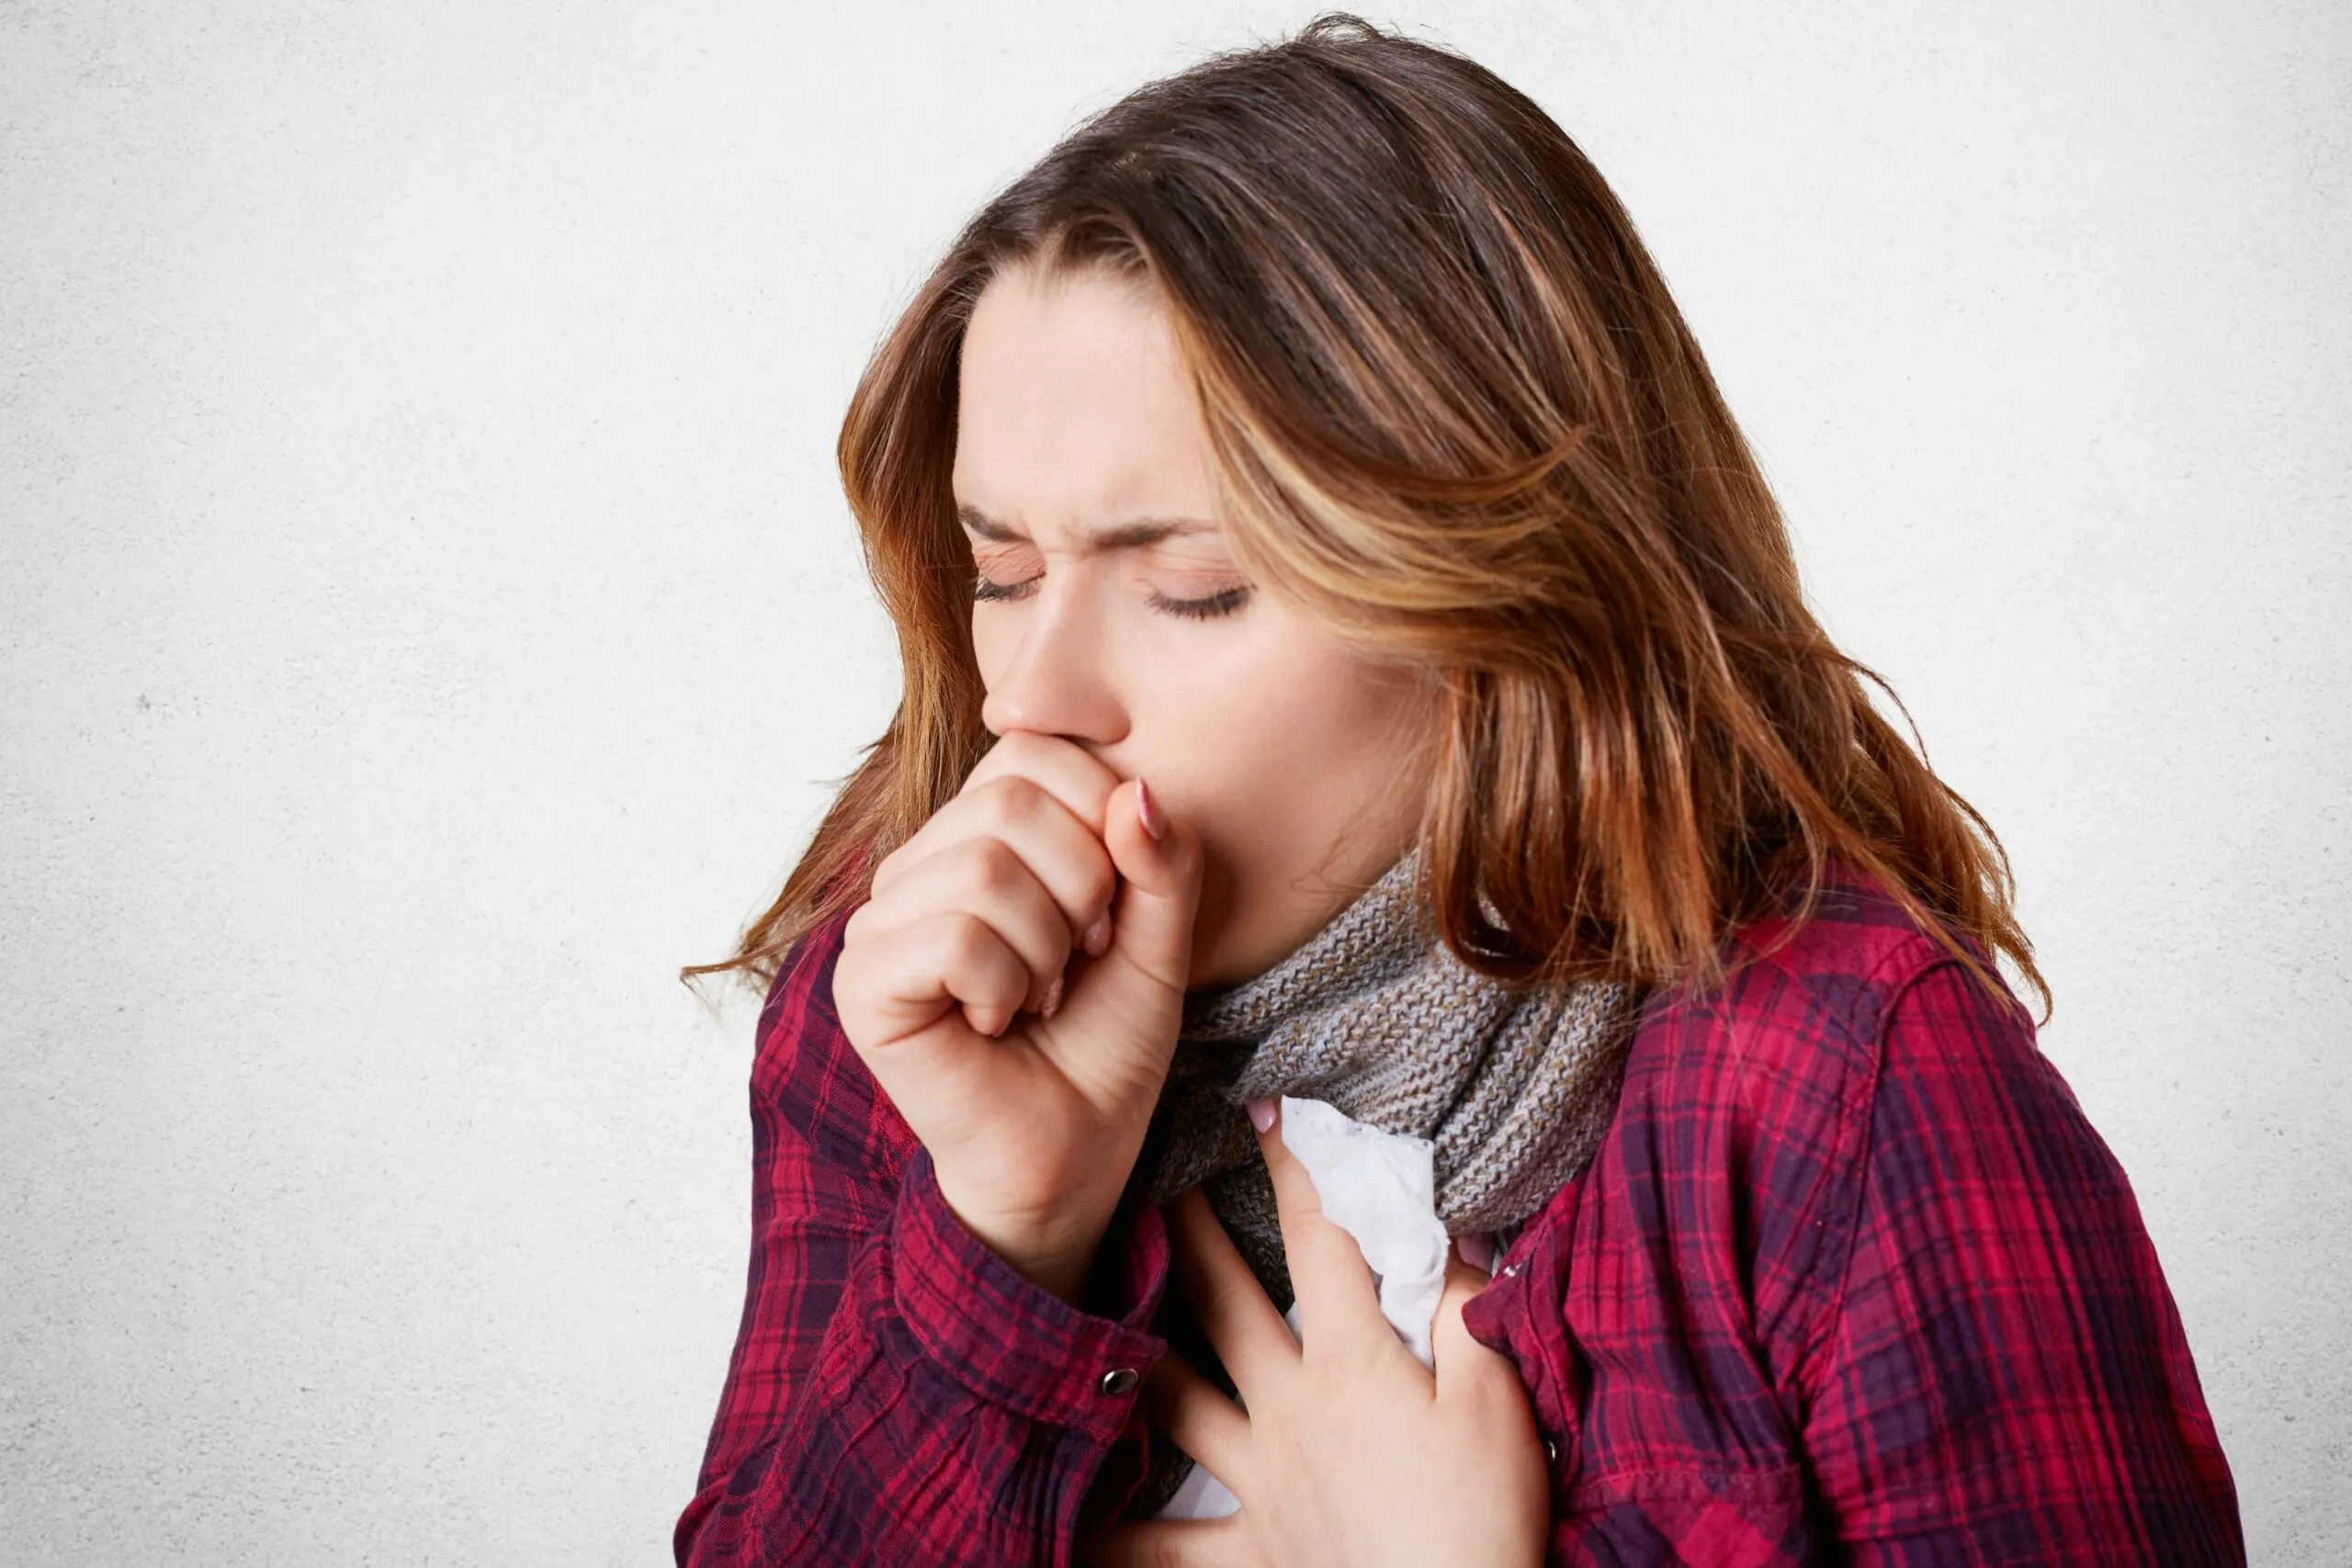 What are the Symptoms and Signs of Pneumonia and the Treatment for Pneumonia?